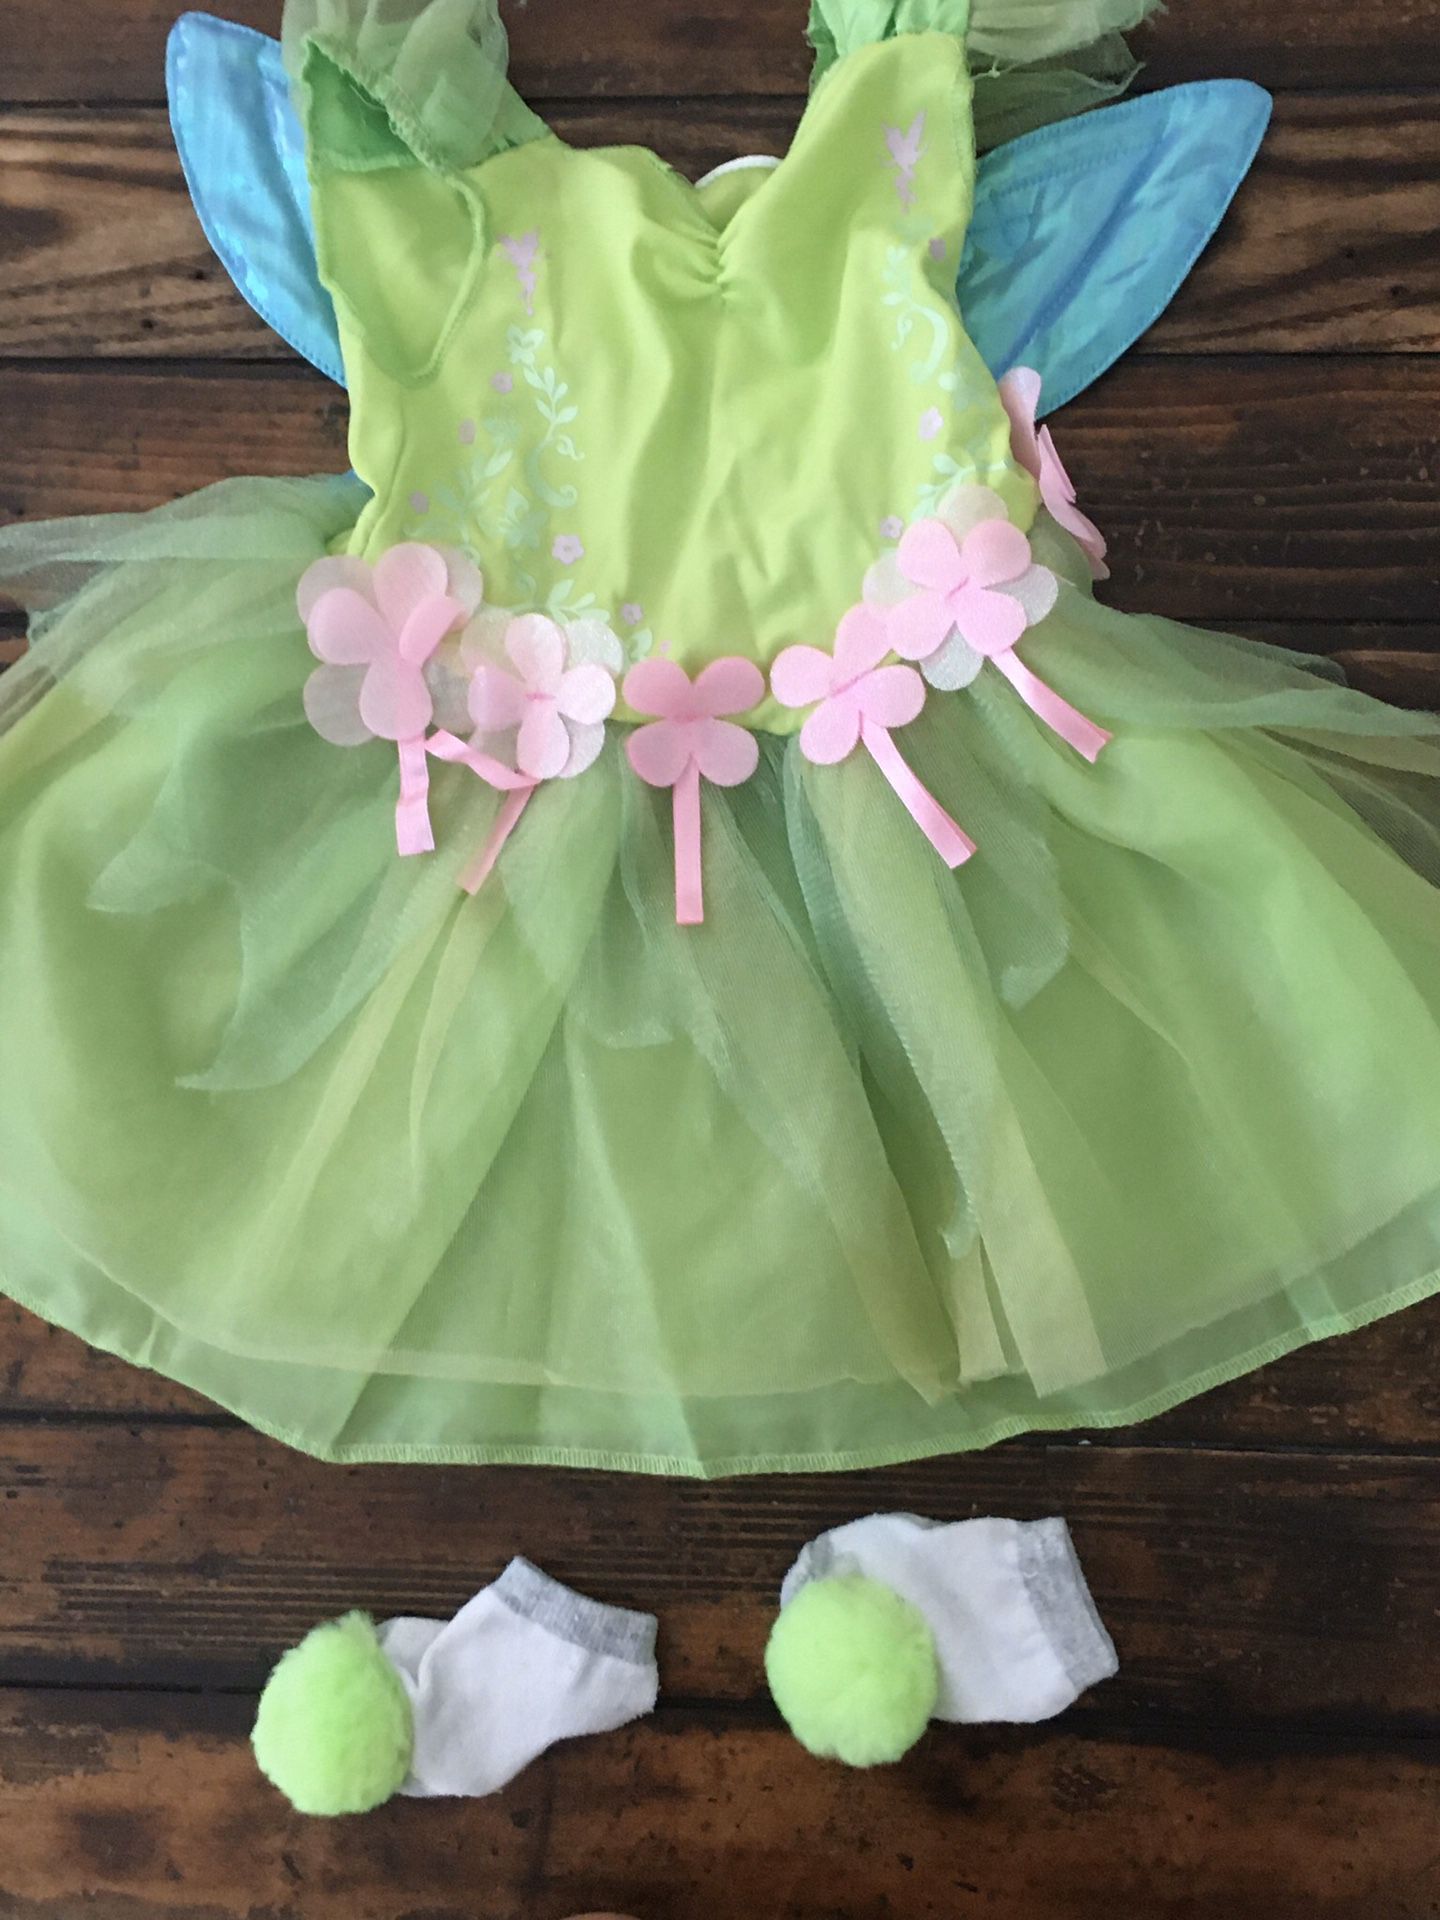 Tinkerbelle Baby Costume 6-12 months